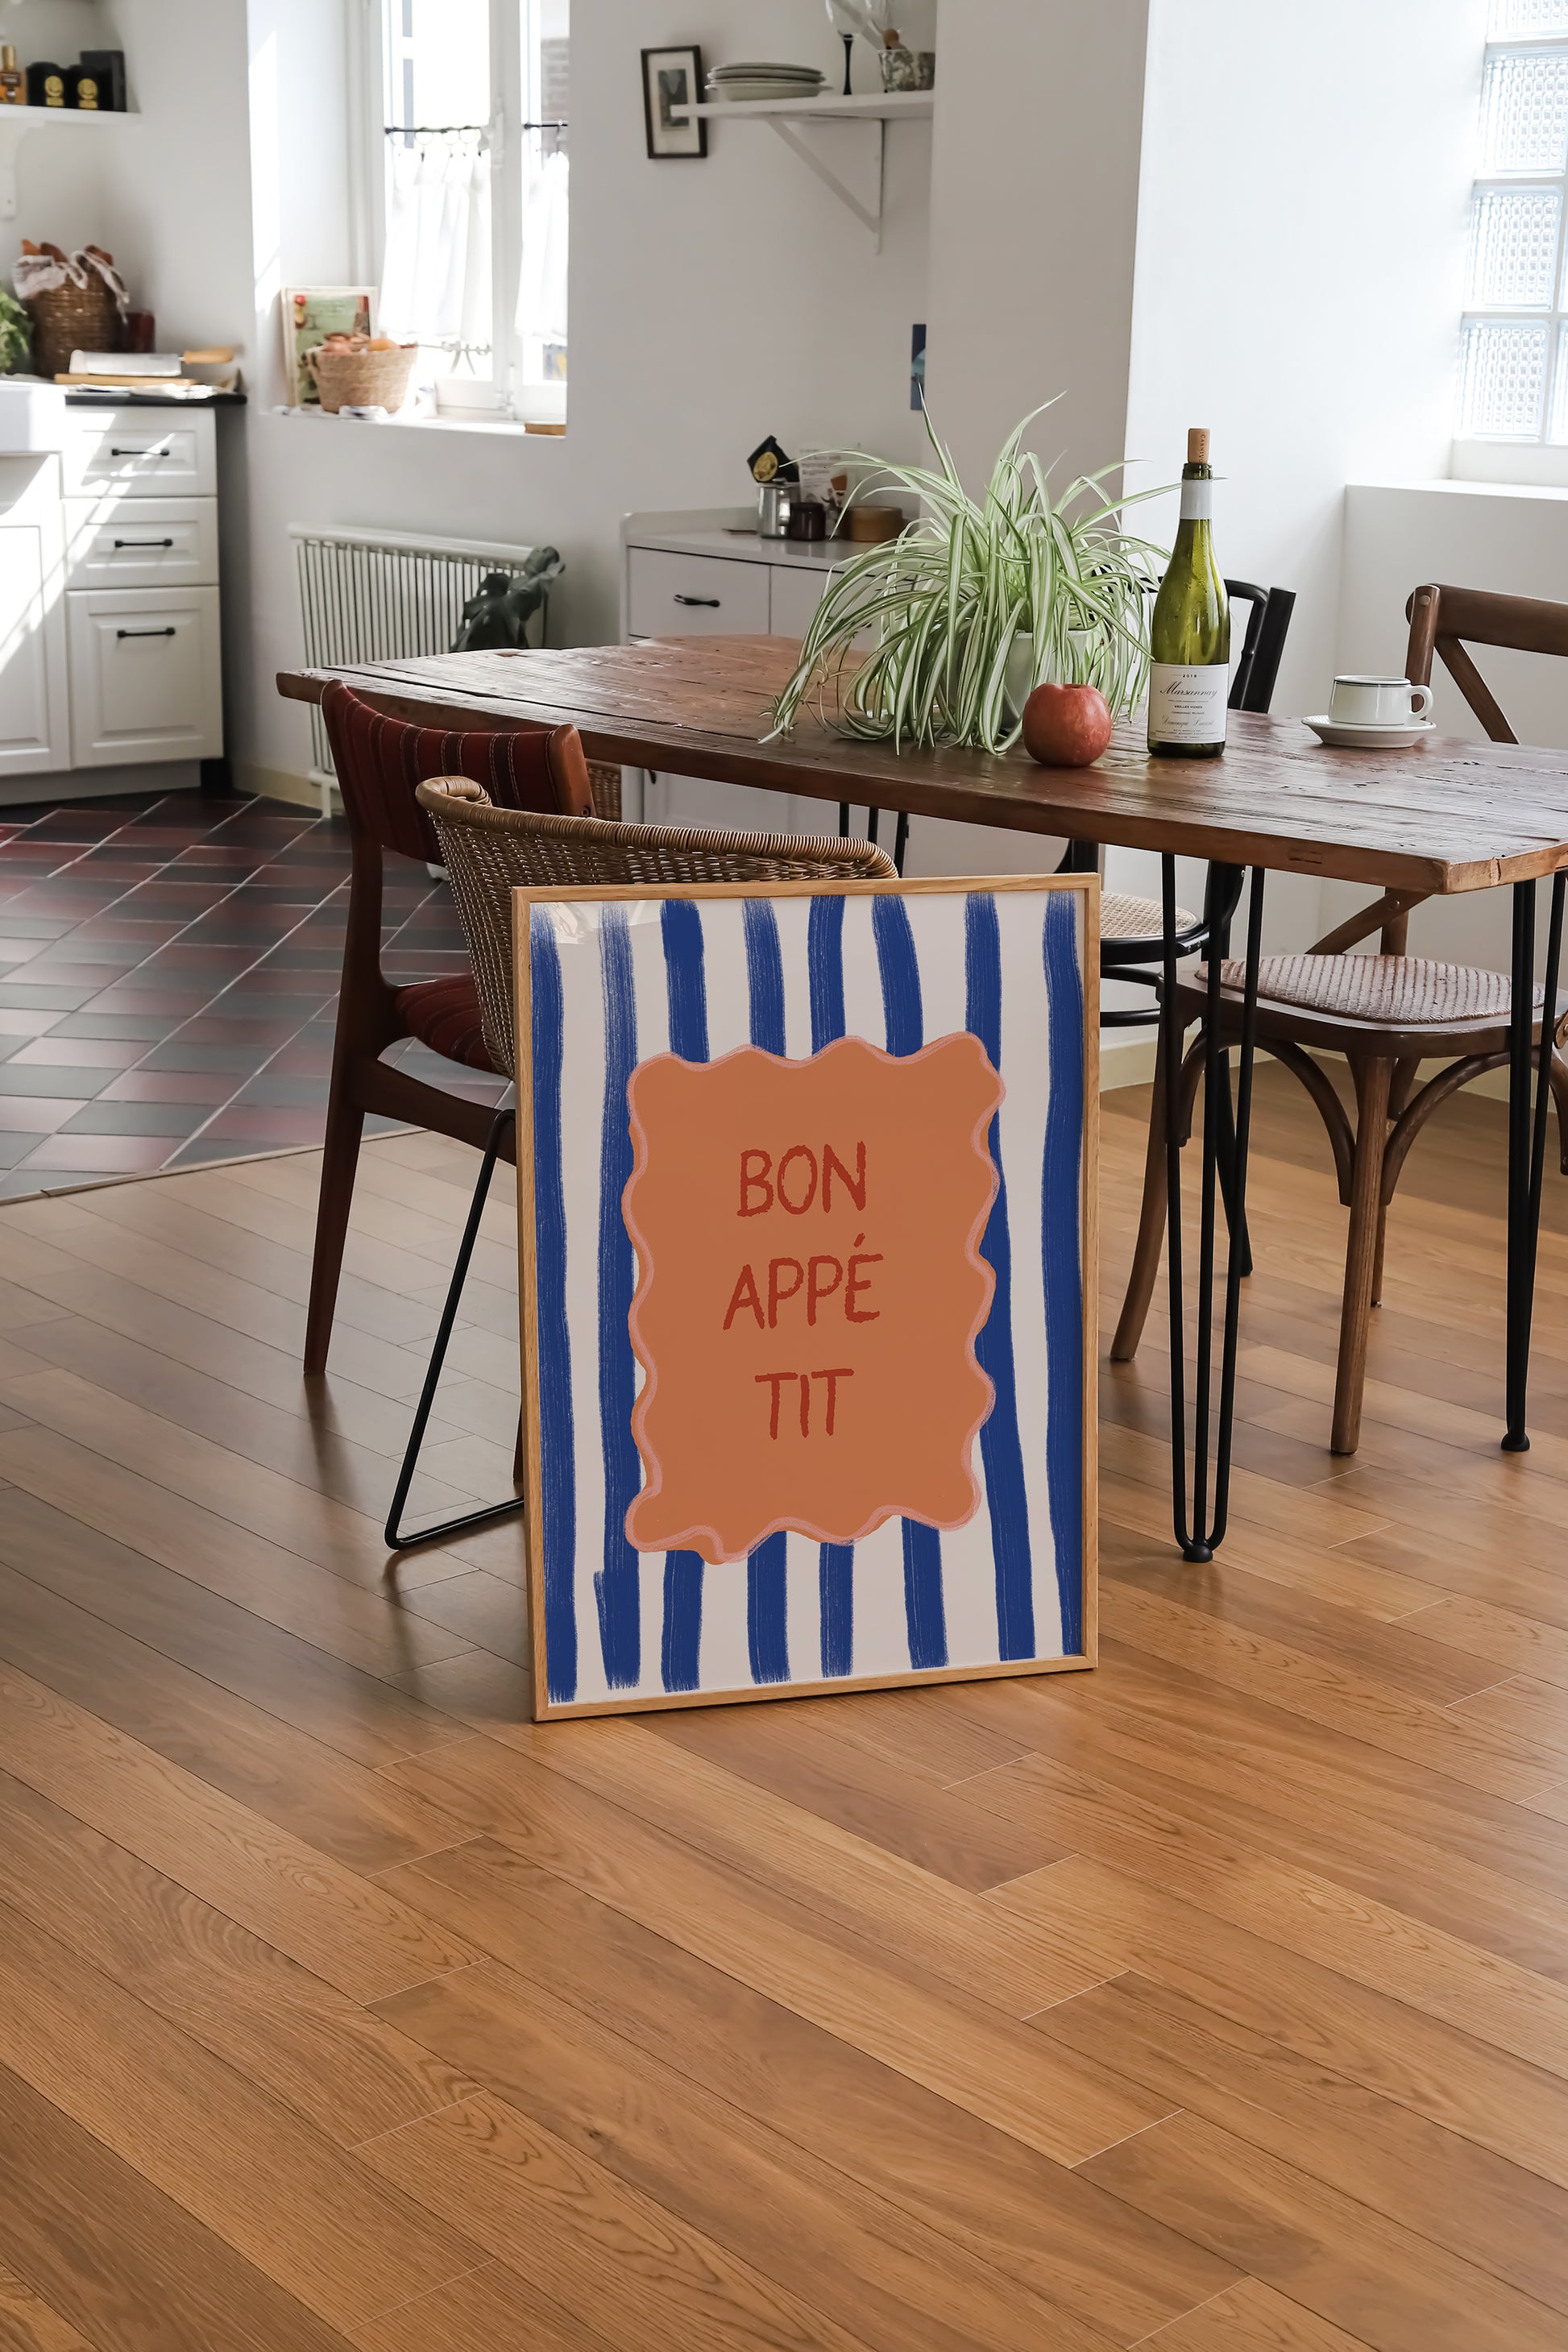 a sign that says bon appe ti on a wooden floor